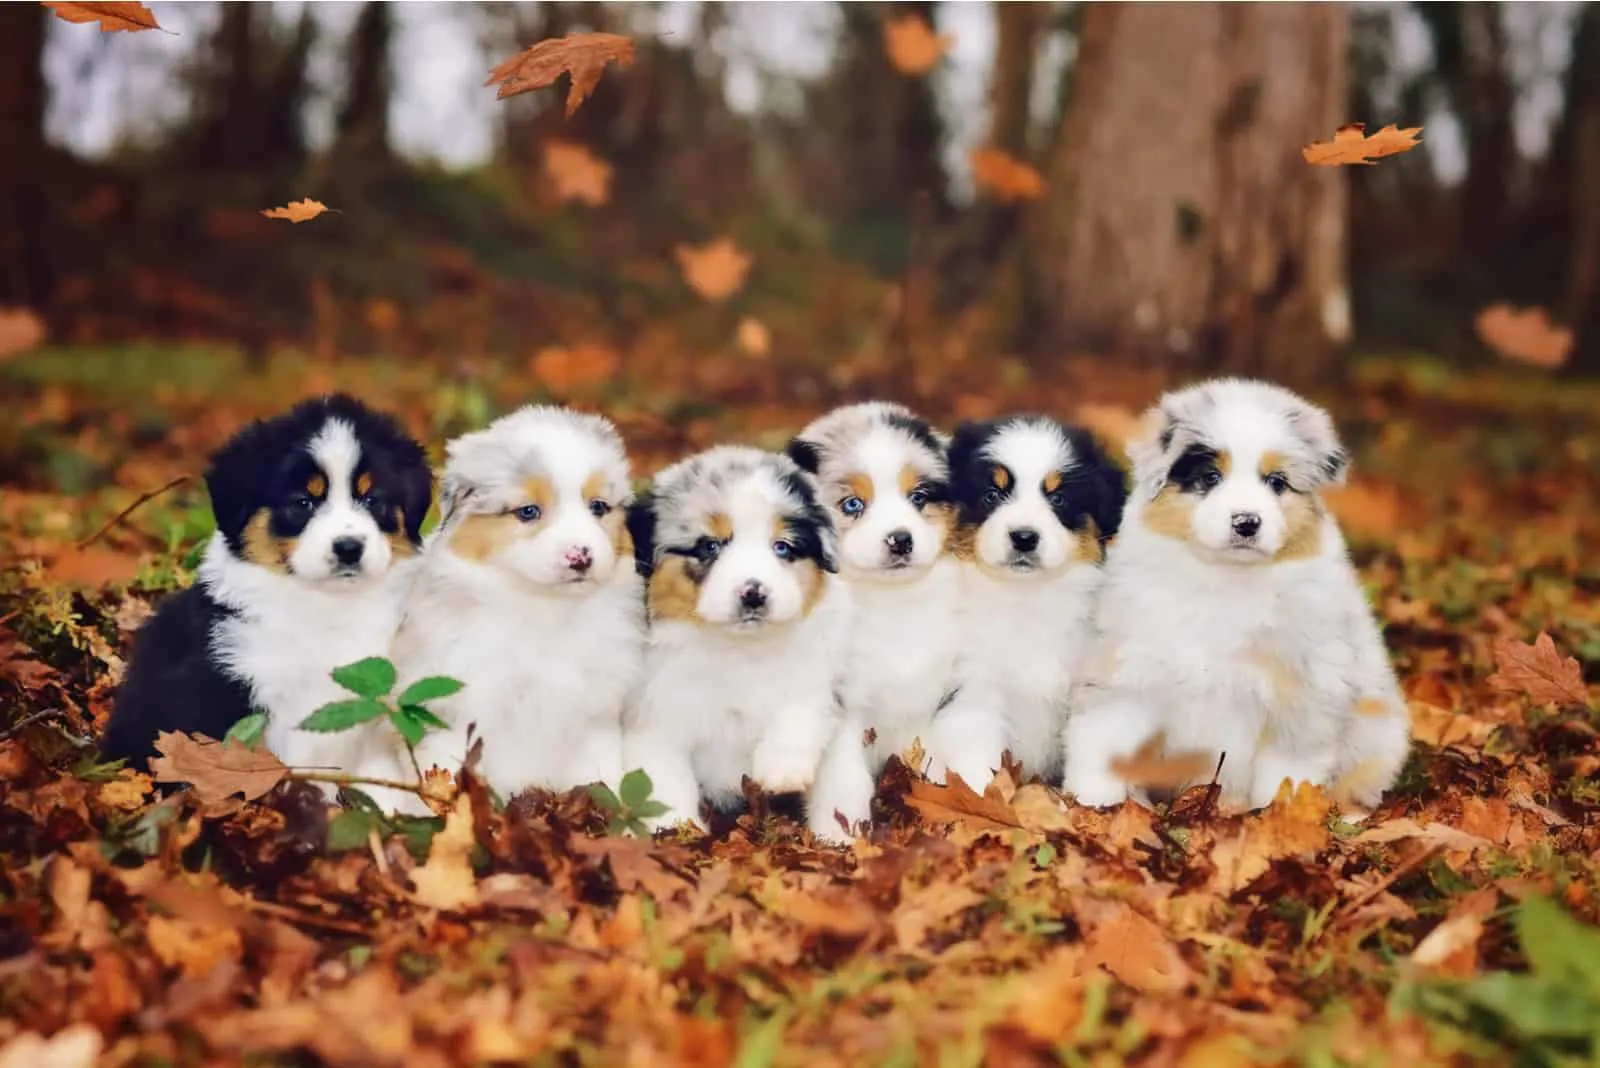 on Autumn in the park on dry leaves sits 6 adorable Australian Shepherd puppies